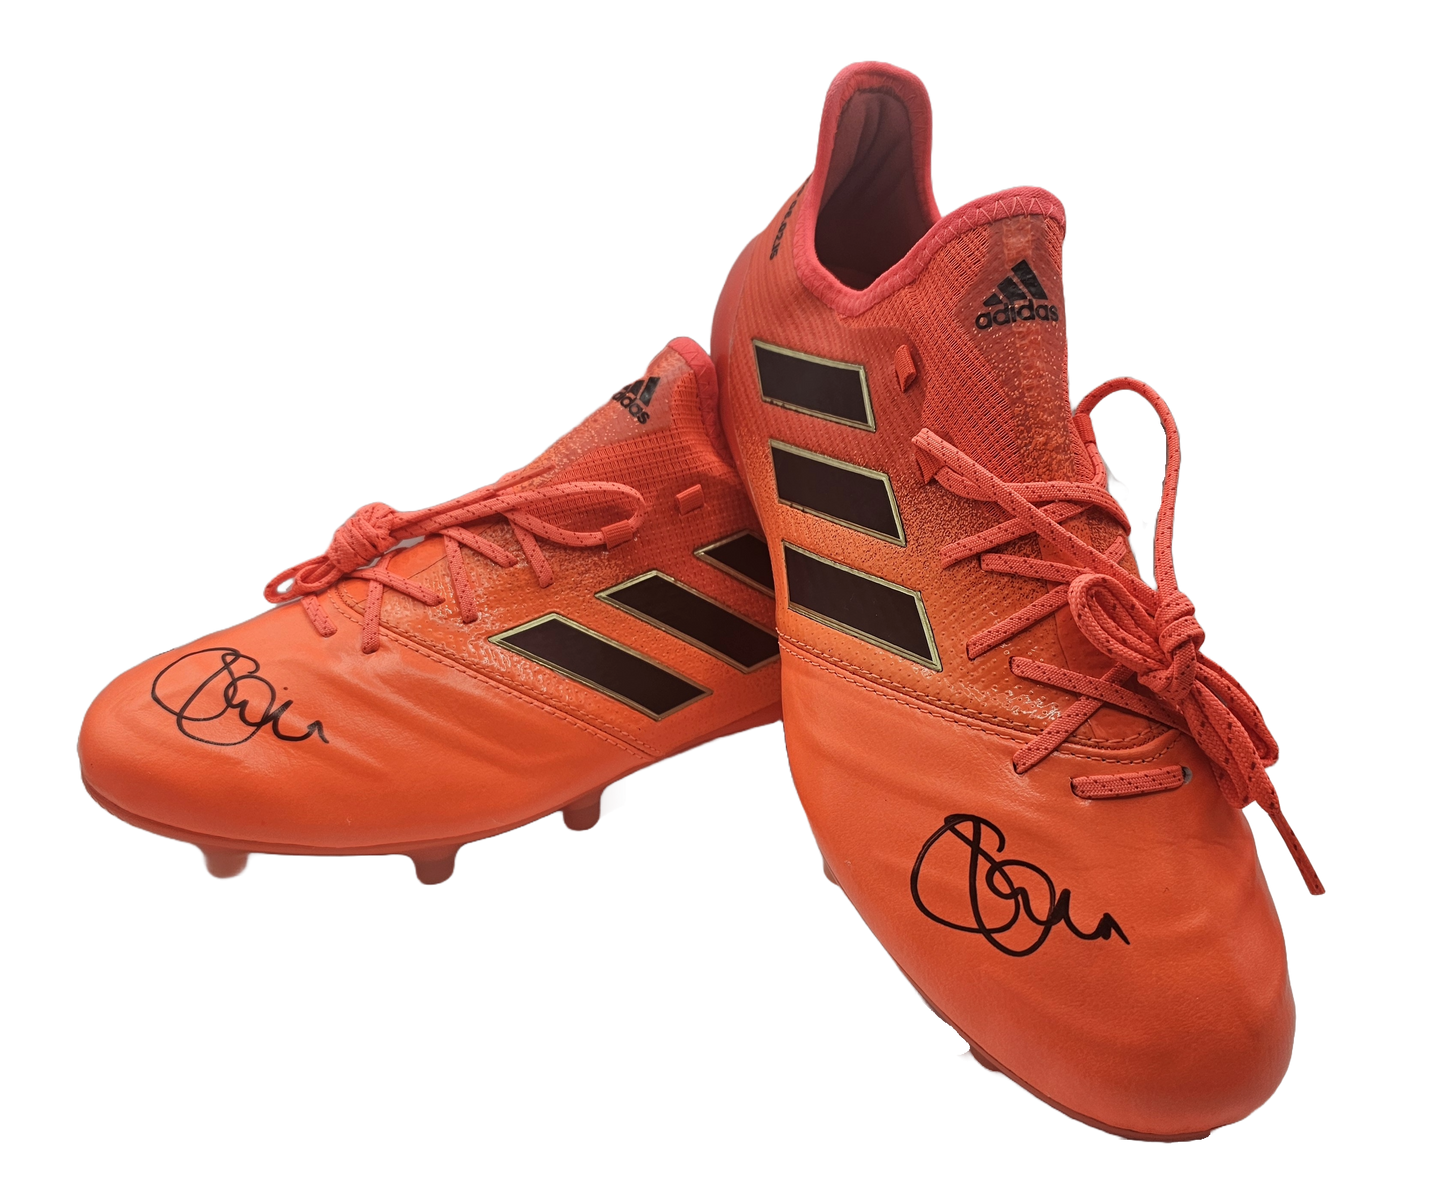 Scott Dann: Player Issued and Signed Boots